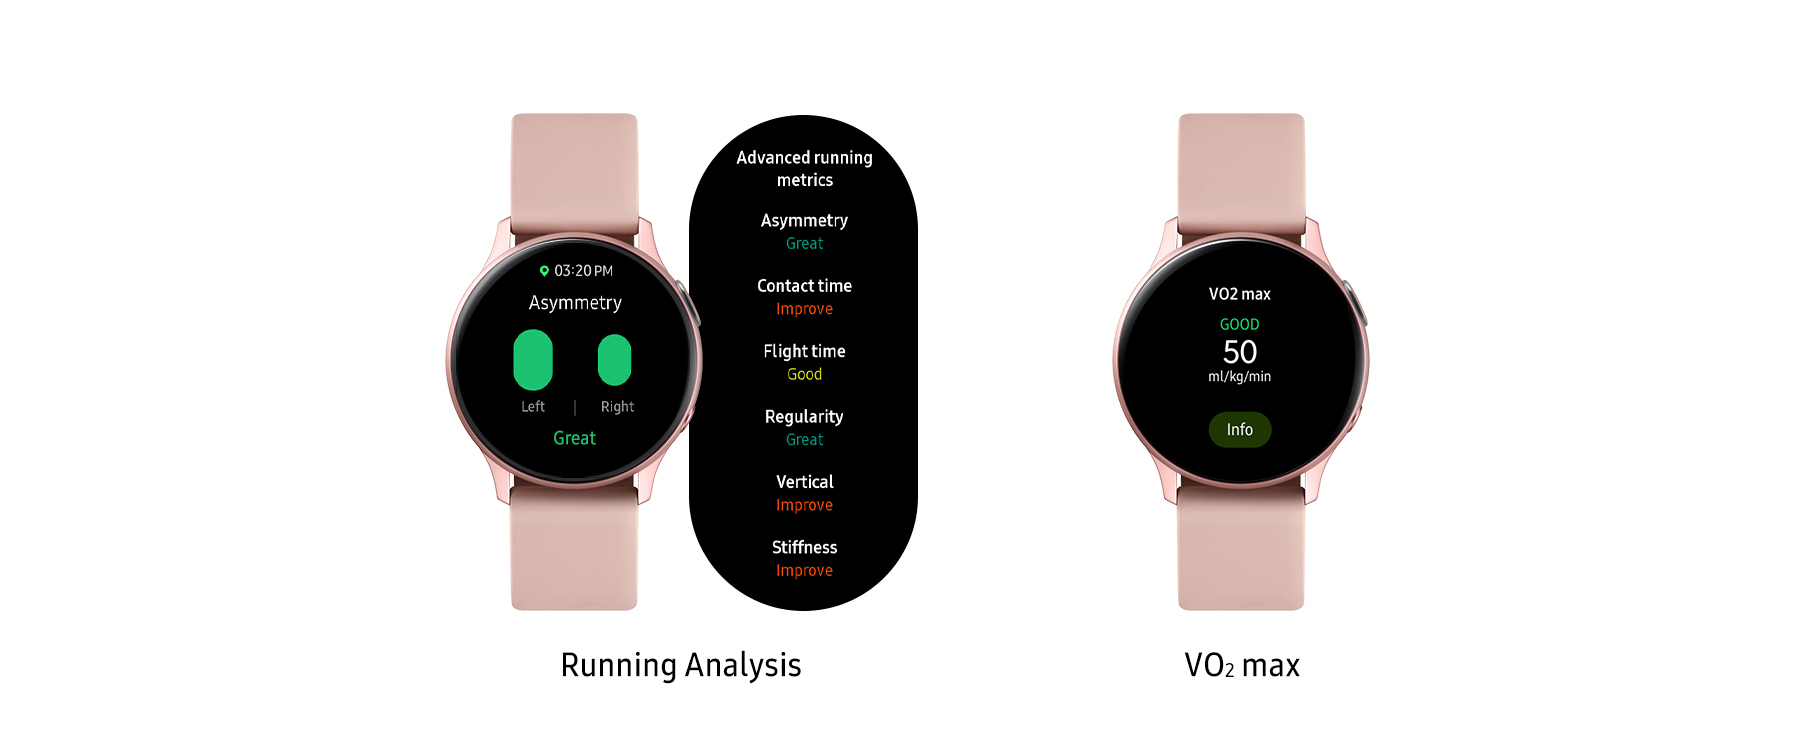 Galaxy Watch Active2's Running Analysis and VO2 max measuring feature